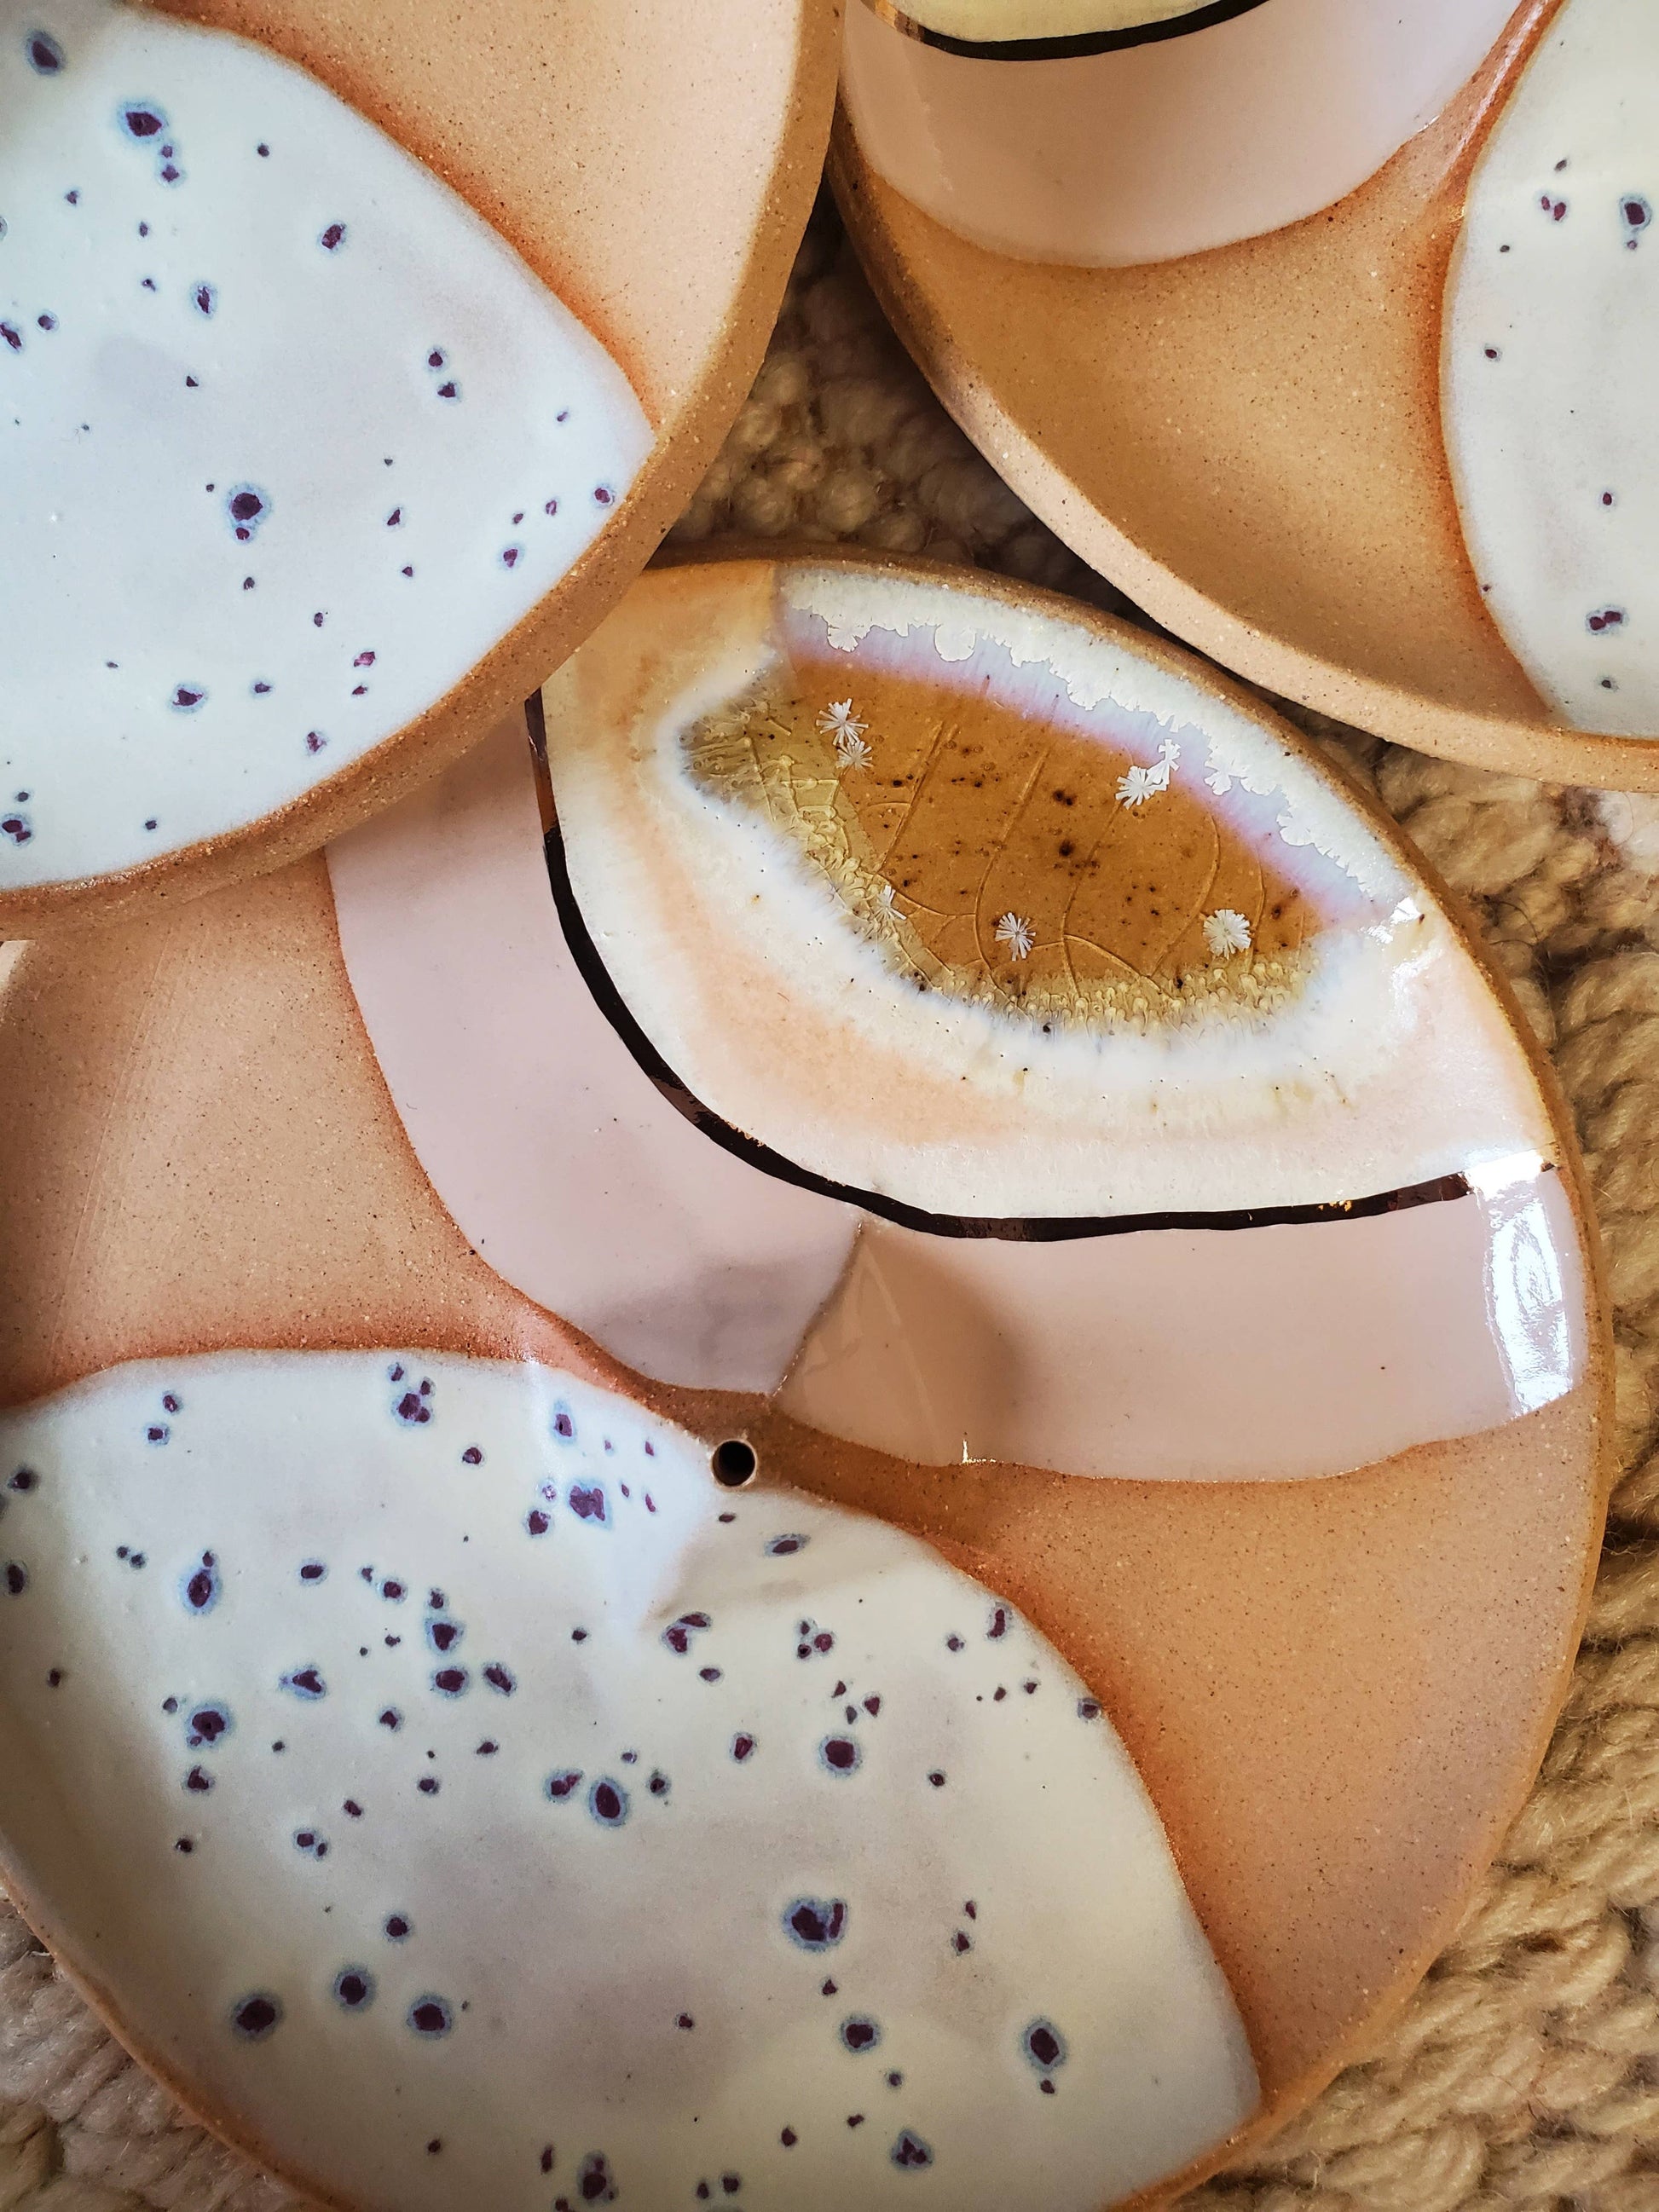 Handmade ceramic incense dish made in Philadelphia with love and enthusiasm. This incense dish features unique designs and colors with gold luster accents.